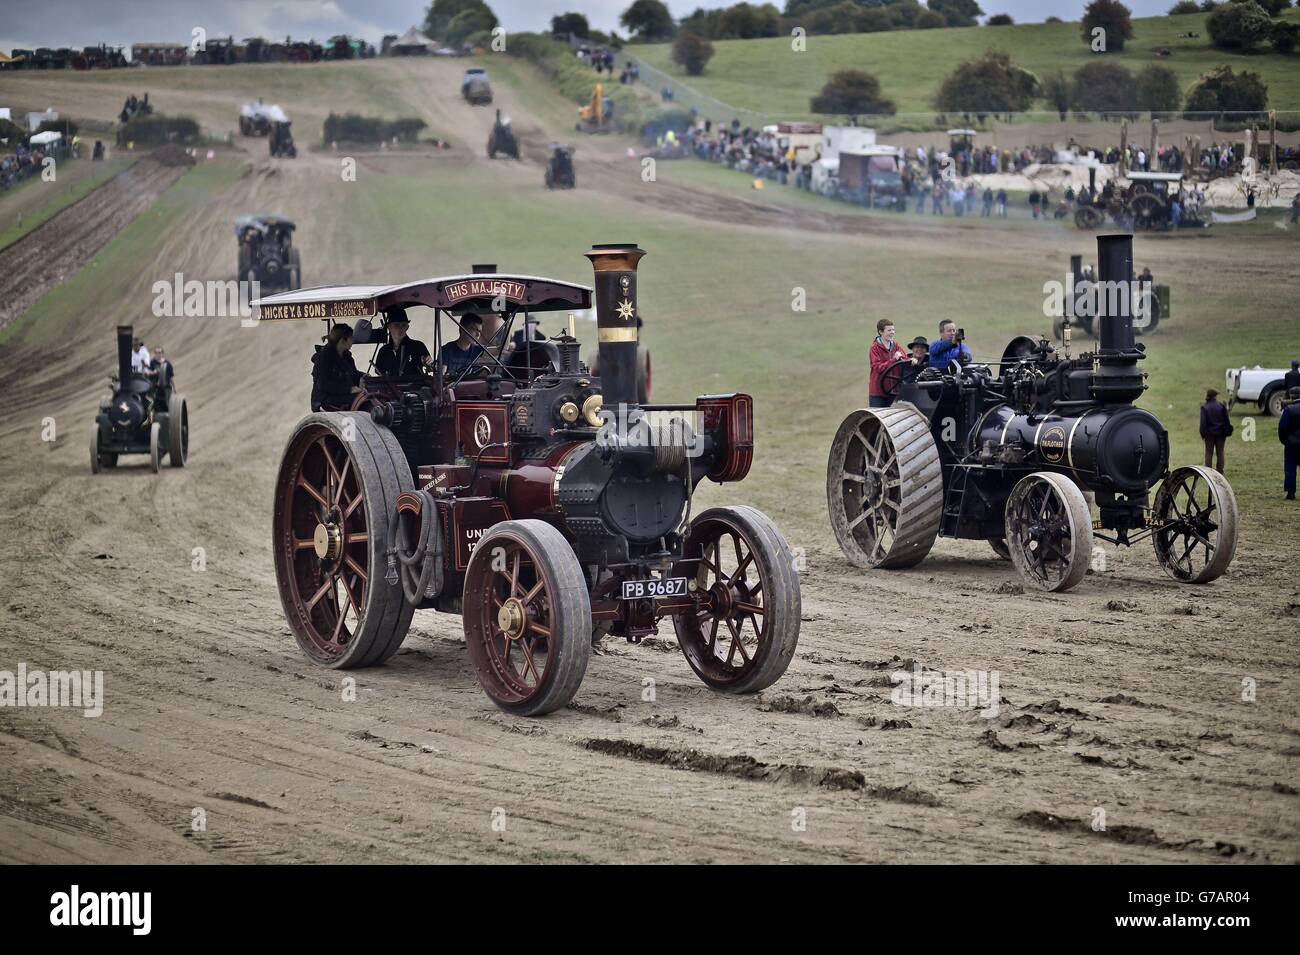 Traction engines make their way around the main arena at the Great Dorset Steam Fair, where hundreds of period steam traction engines and heavy mechanical equipment from all eras gather for the annual show. Stock Photo